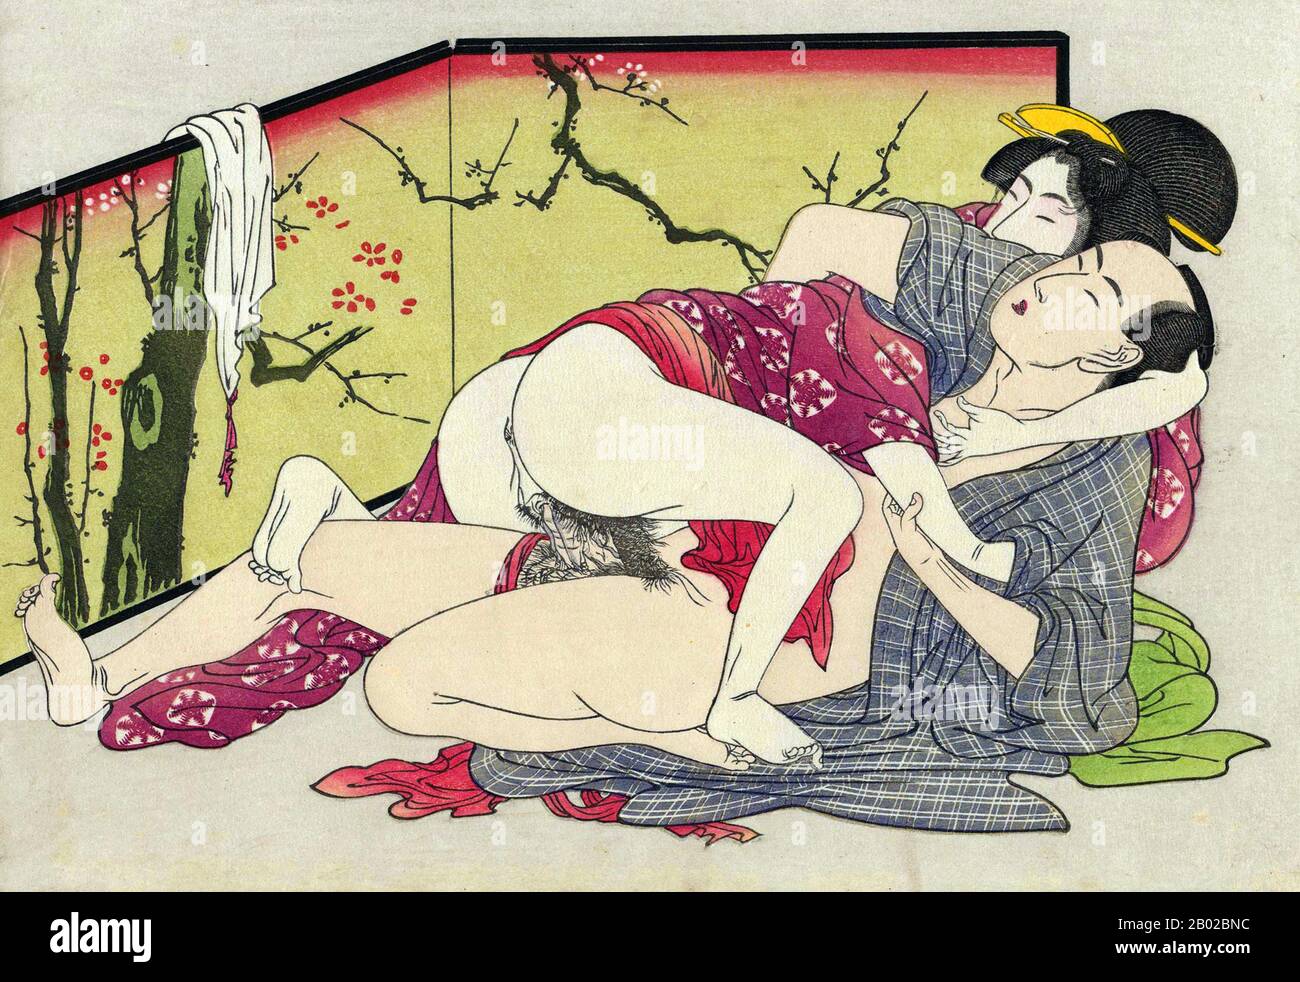 Kitagawa Utamaro (ca. 1753 - October 31, 1806) was a Japanese printmaker and painter, who is considered one of the greatest artists of woodblock prints (ukiyo-e). He is known especially for his masterfully composed studies of women, known as bijinga. He also produced nature studies, particularly illustrated books of insects. Stock Photo